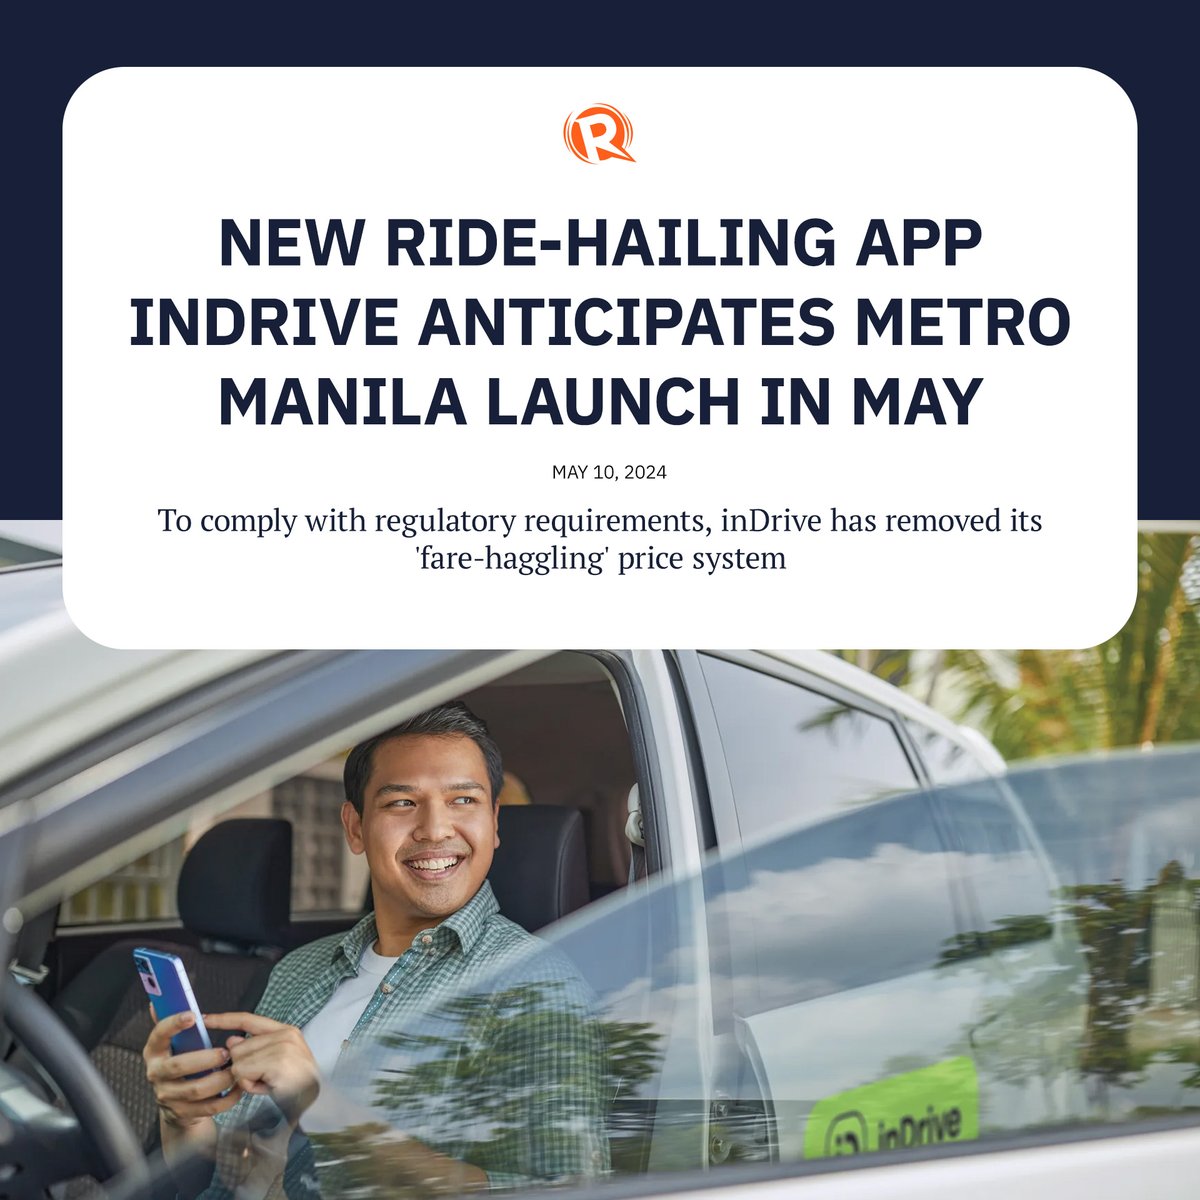 inDrive could receive approval from the Land Transportation Franchising and Regulatory Board as early as this week, according to Afanasii Petrov, inDrive’s business development manager for Southeast Asia. trib.al/PrSJ738